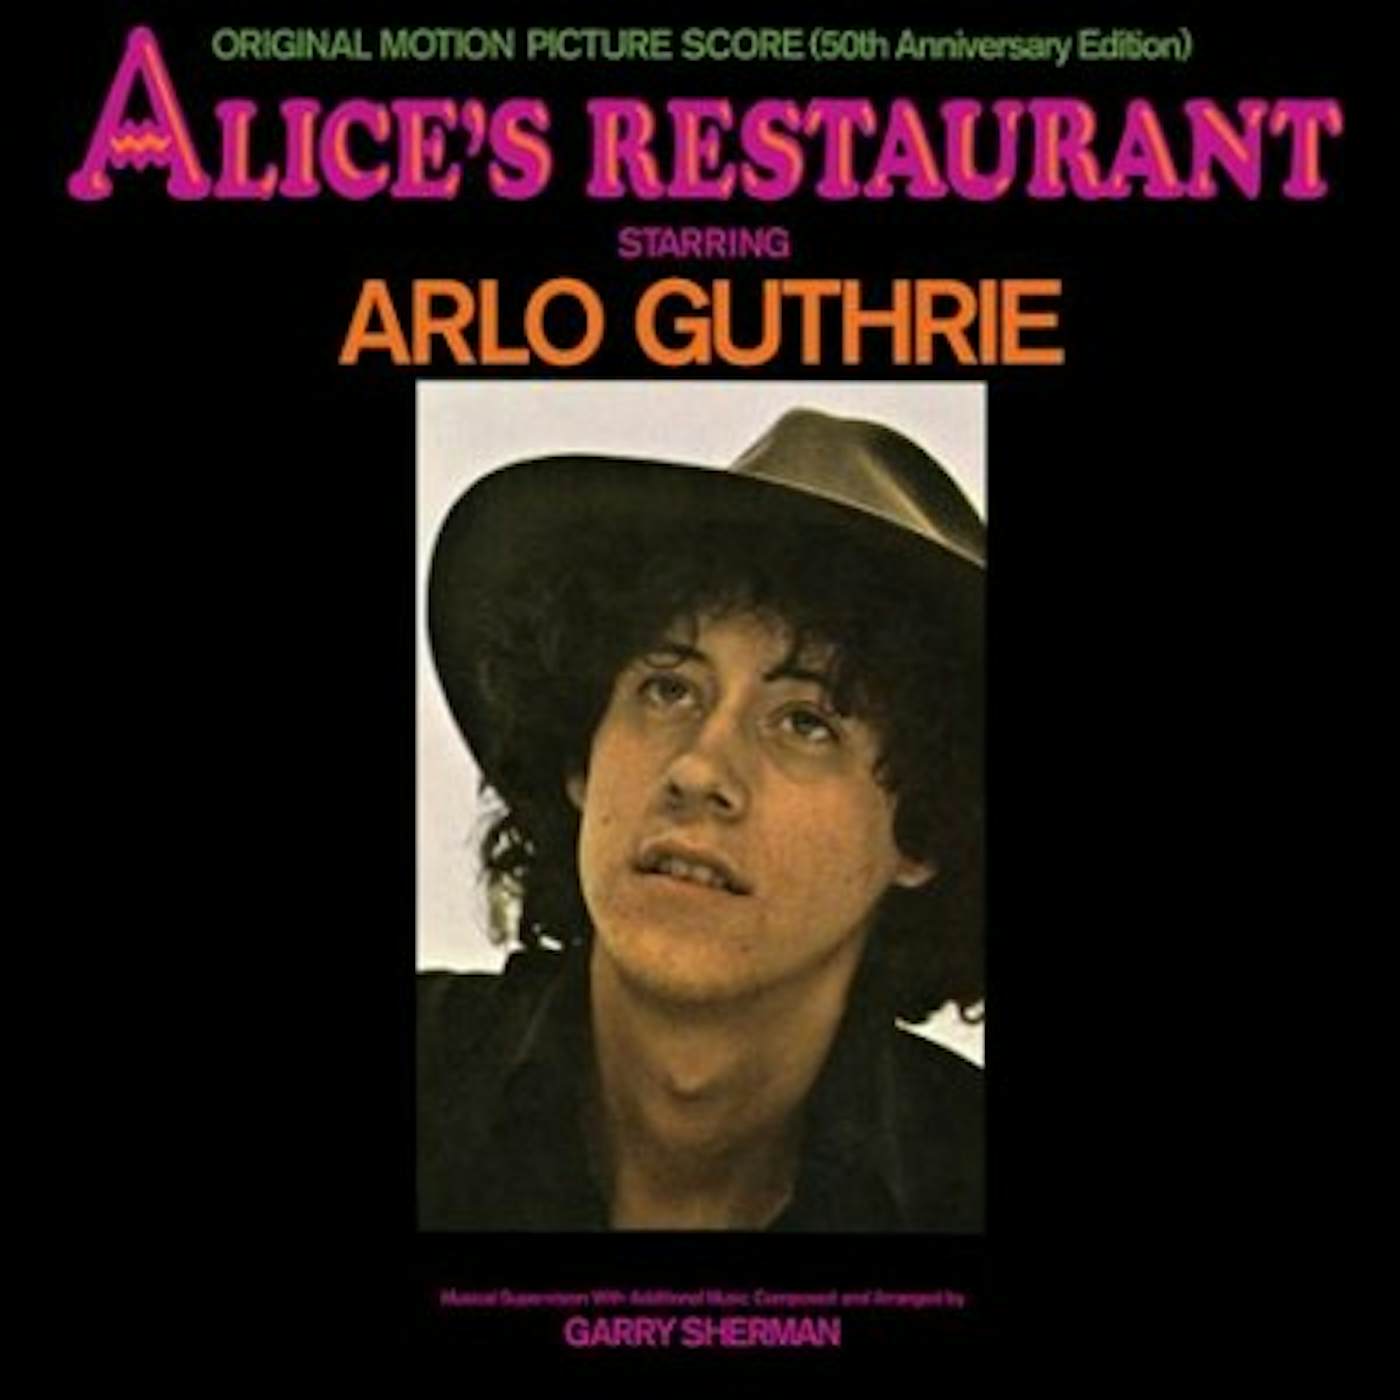 Arlo Guthrie ALICE'S RESTAURANT: Original Soundtrack MGM MOTION PICTURE (50TH ANNIVERSARY EDITION) Vinyl Record